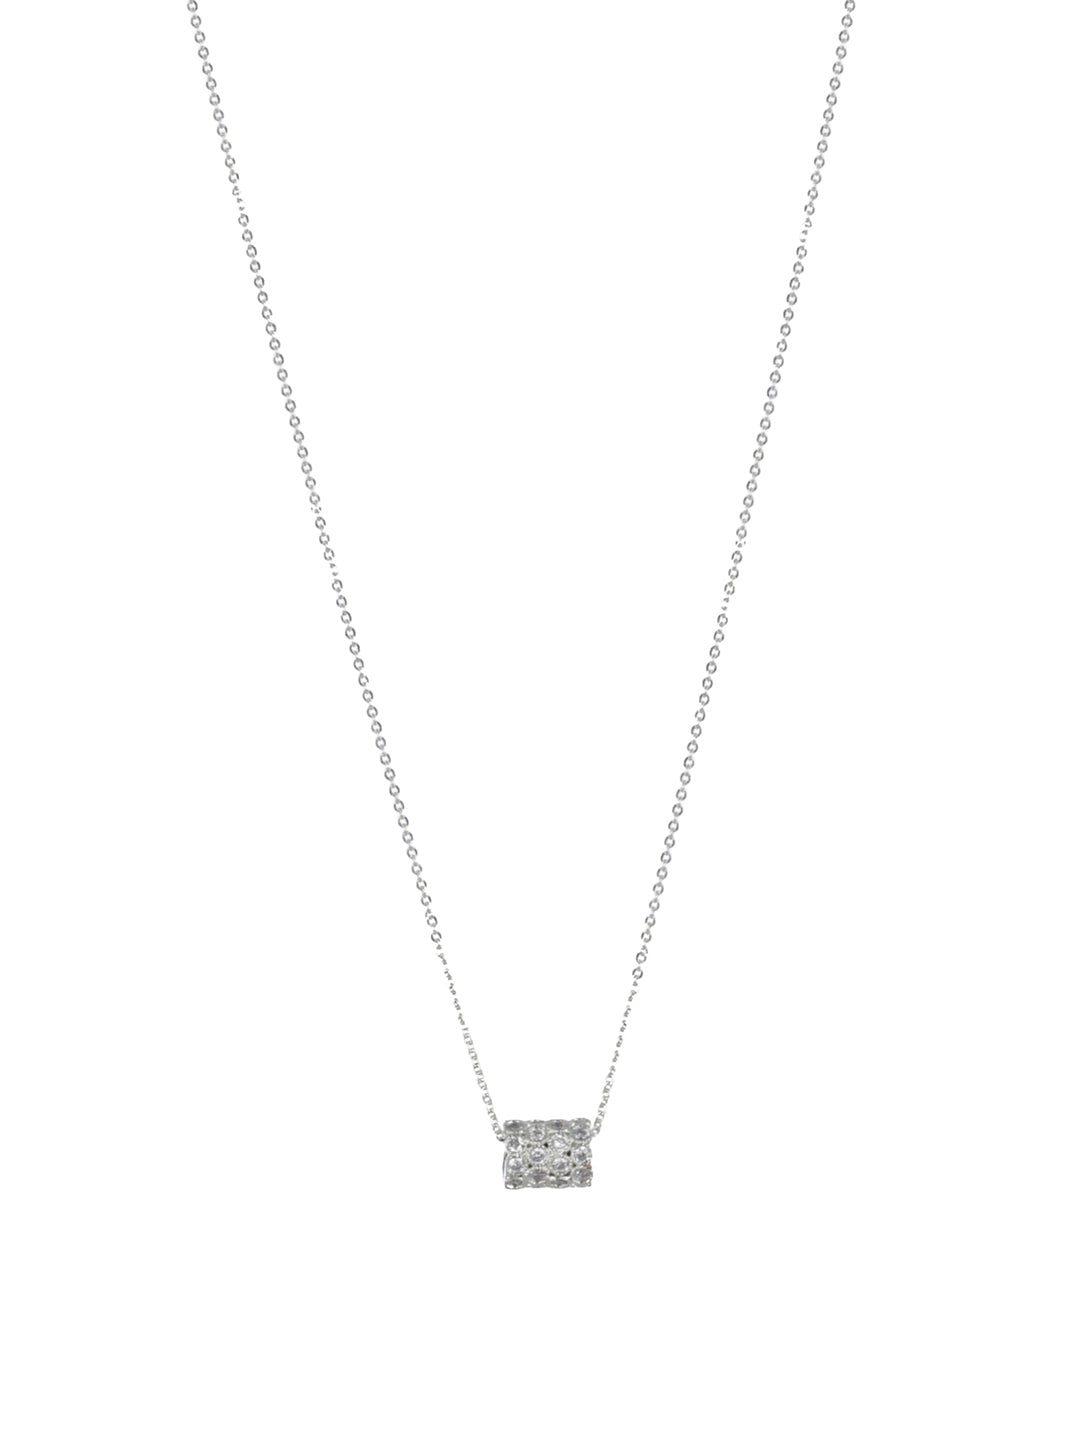 Priyaasi Geometric AD Silver-Plated Necklace